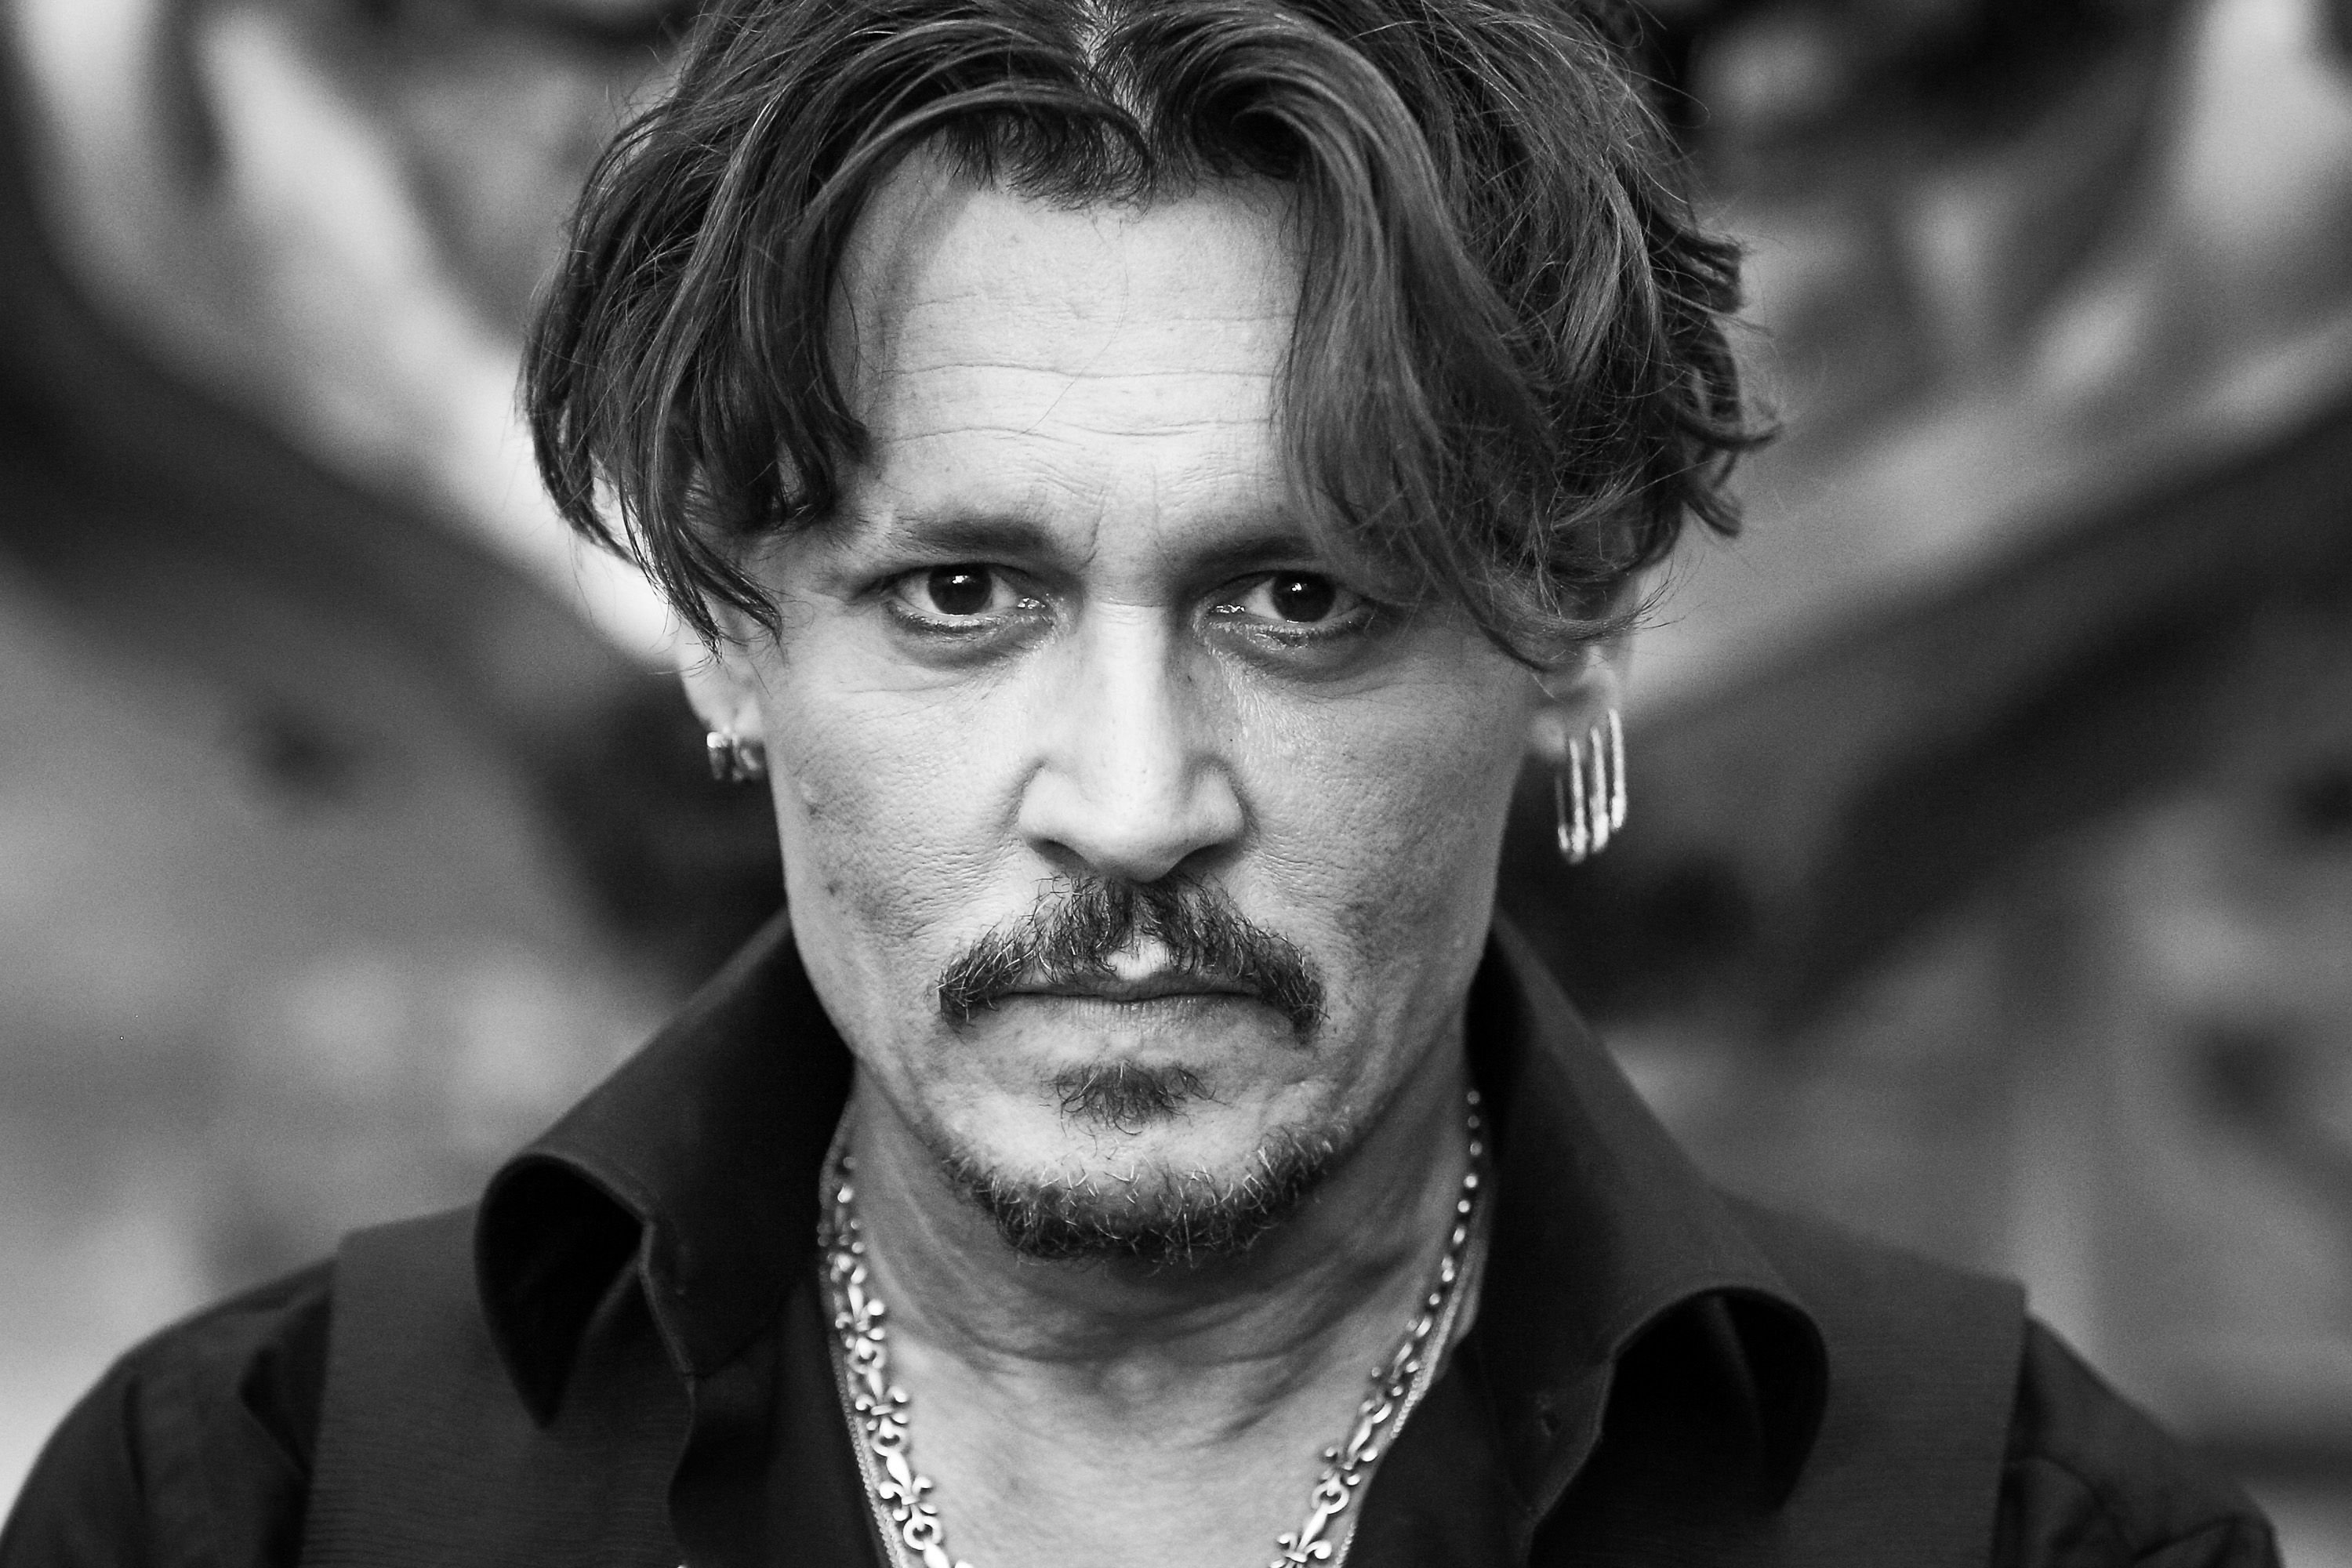 Johnny Depp attends the premiere of Disney's "Pirates Of The Caribbean: Dead Men Tell No Tales." | Source: Getty Images